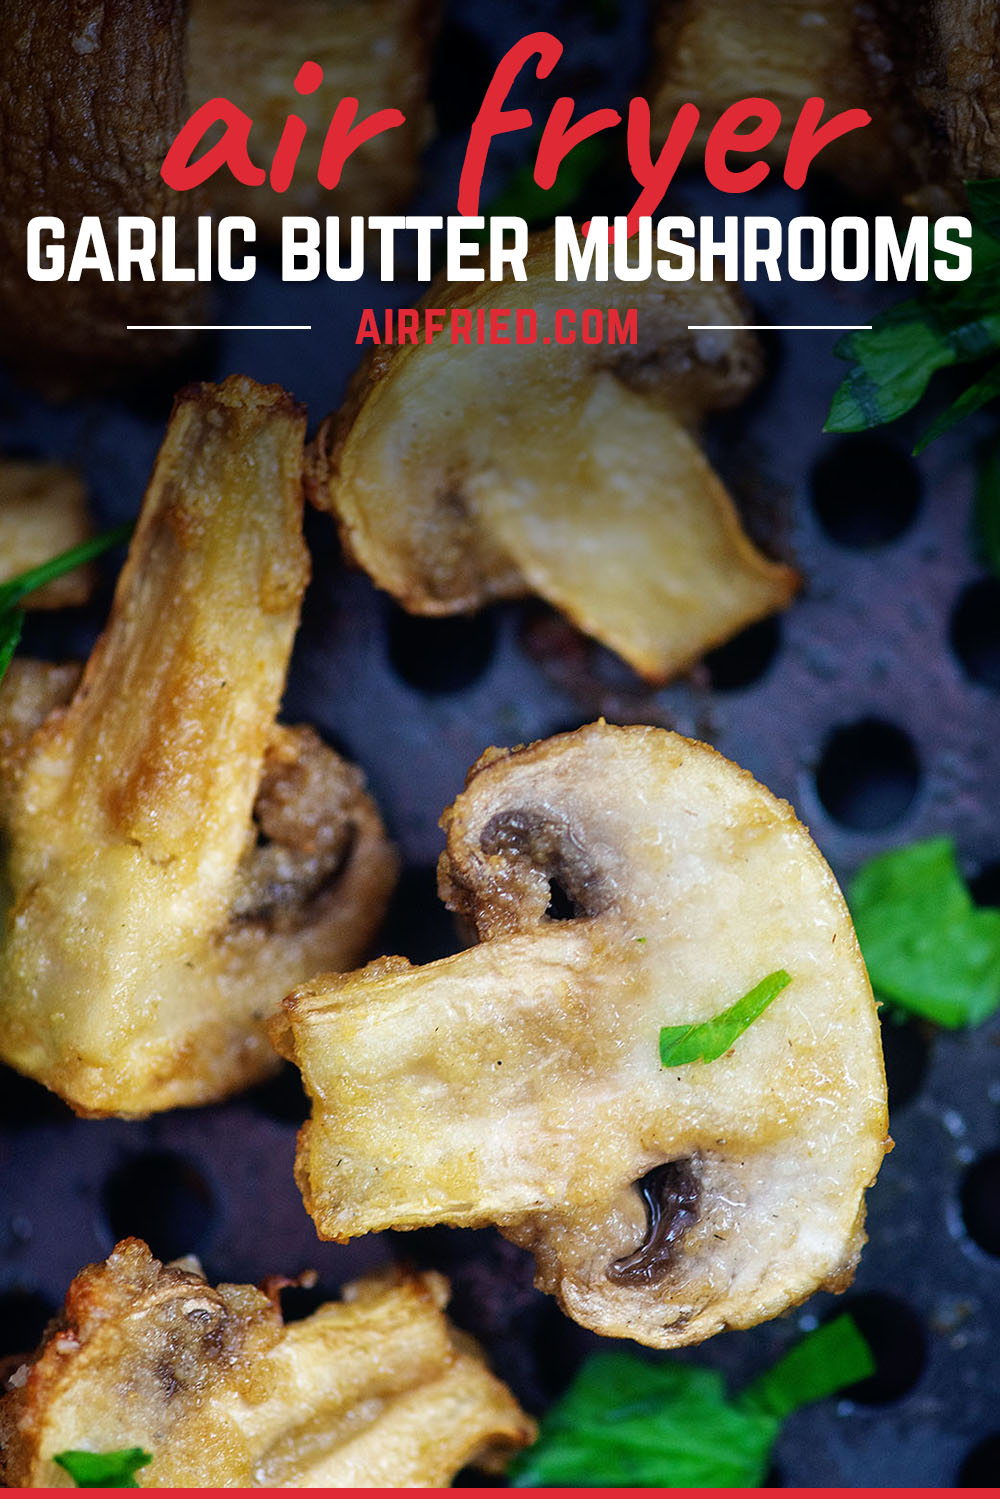 These garlic butter mushrooms are really quick and easy snack to make in your air fryer! #friedmushrooms #airfried #appetizers